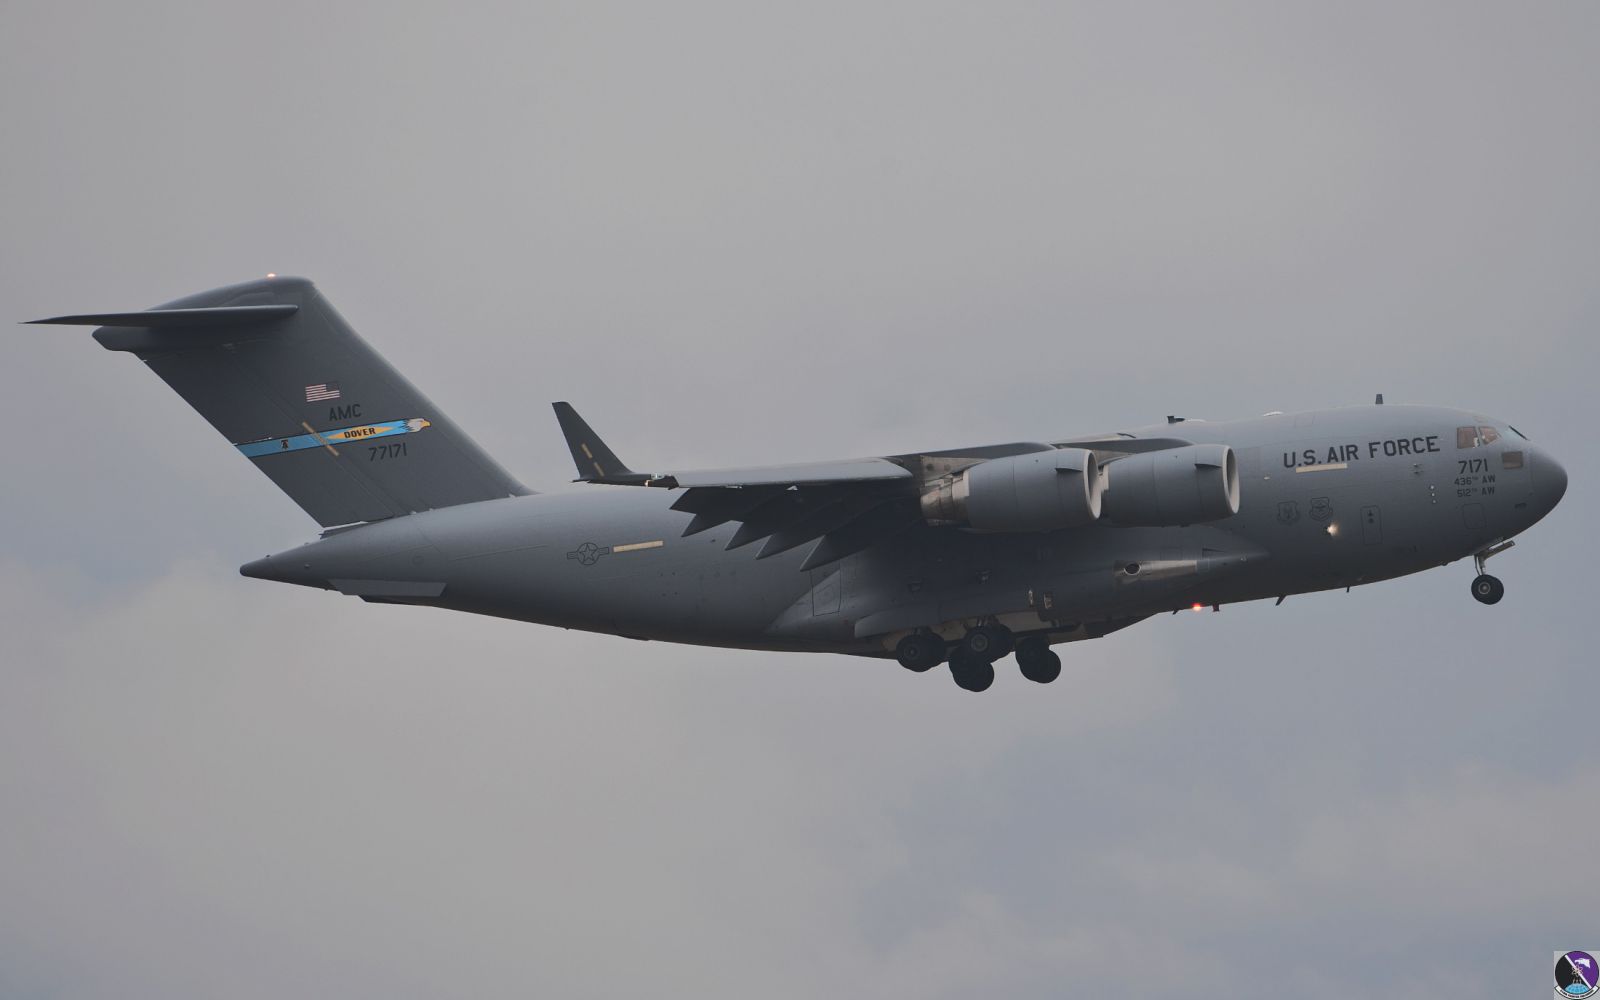 aviano january 04  2012 rch226 c 17a 07 7171 436thaw dover afb